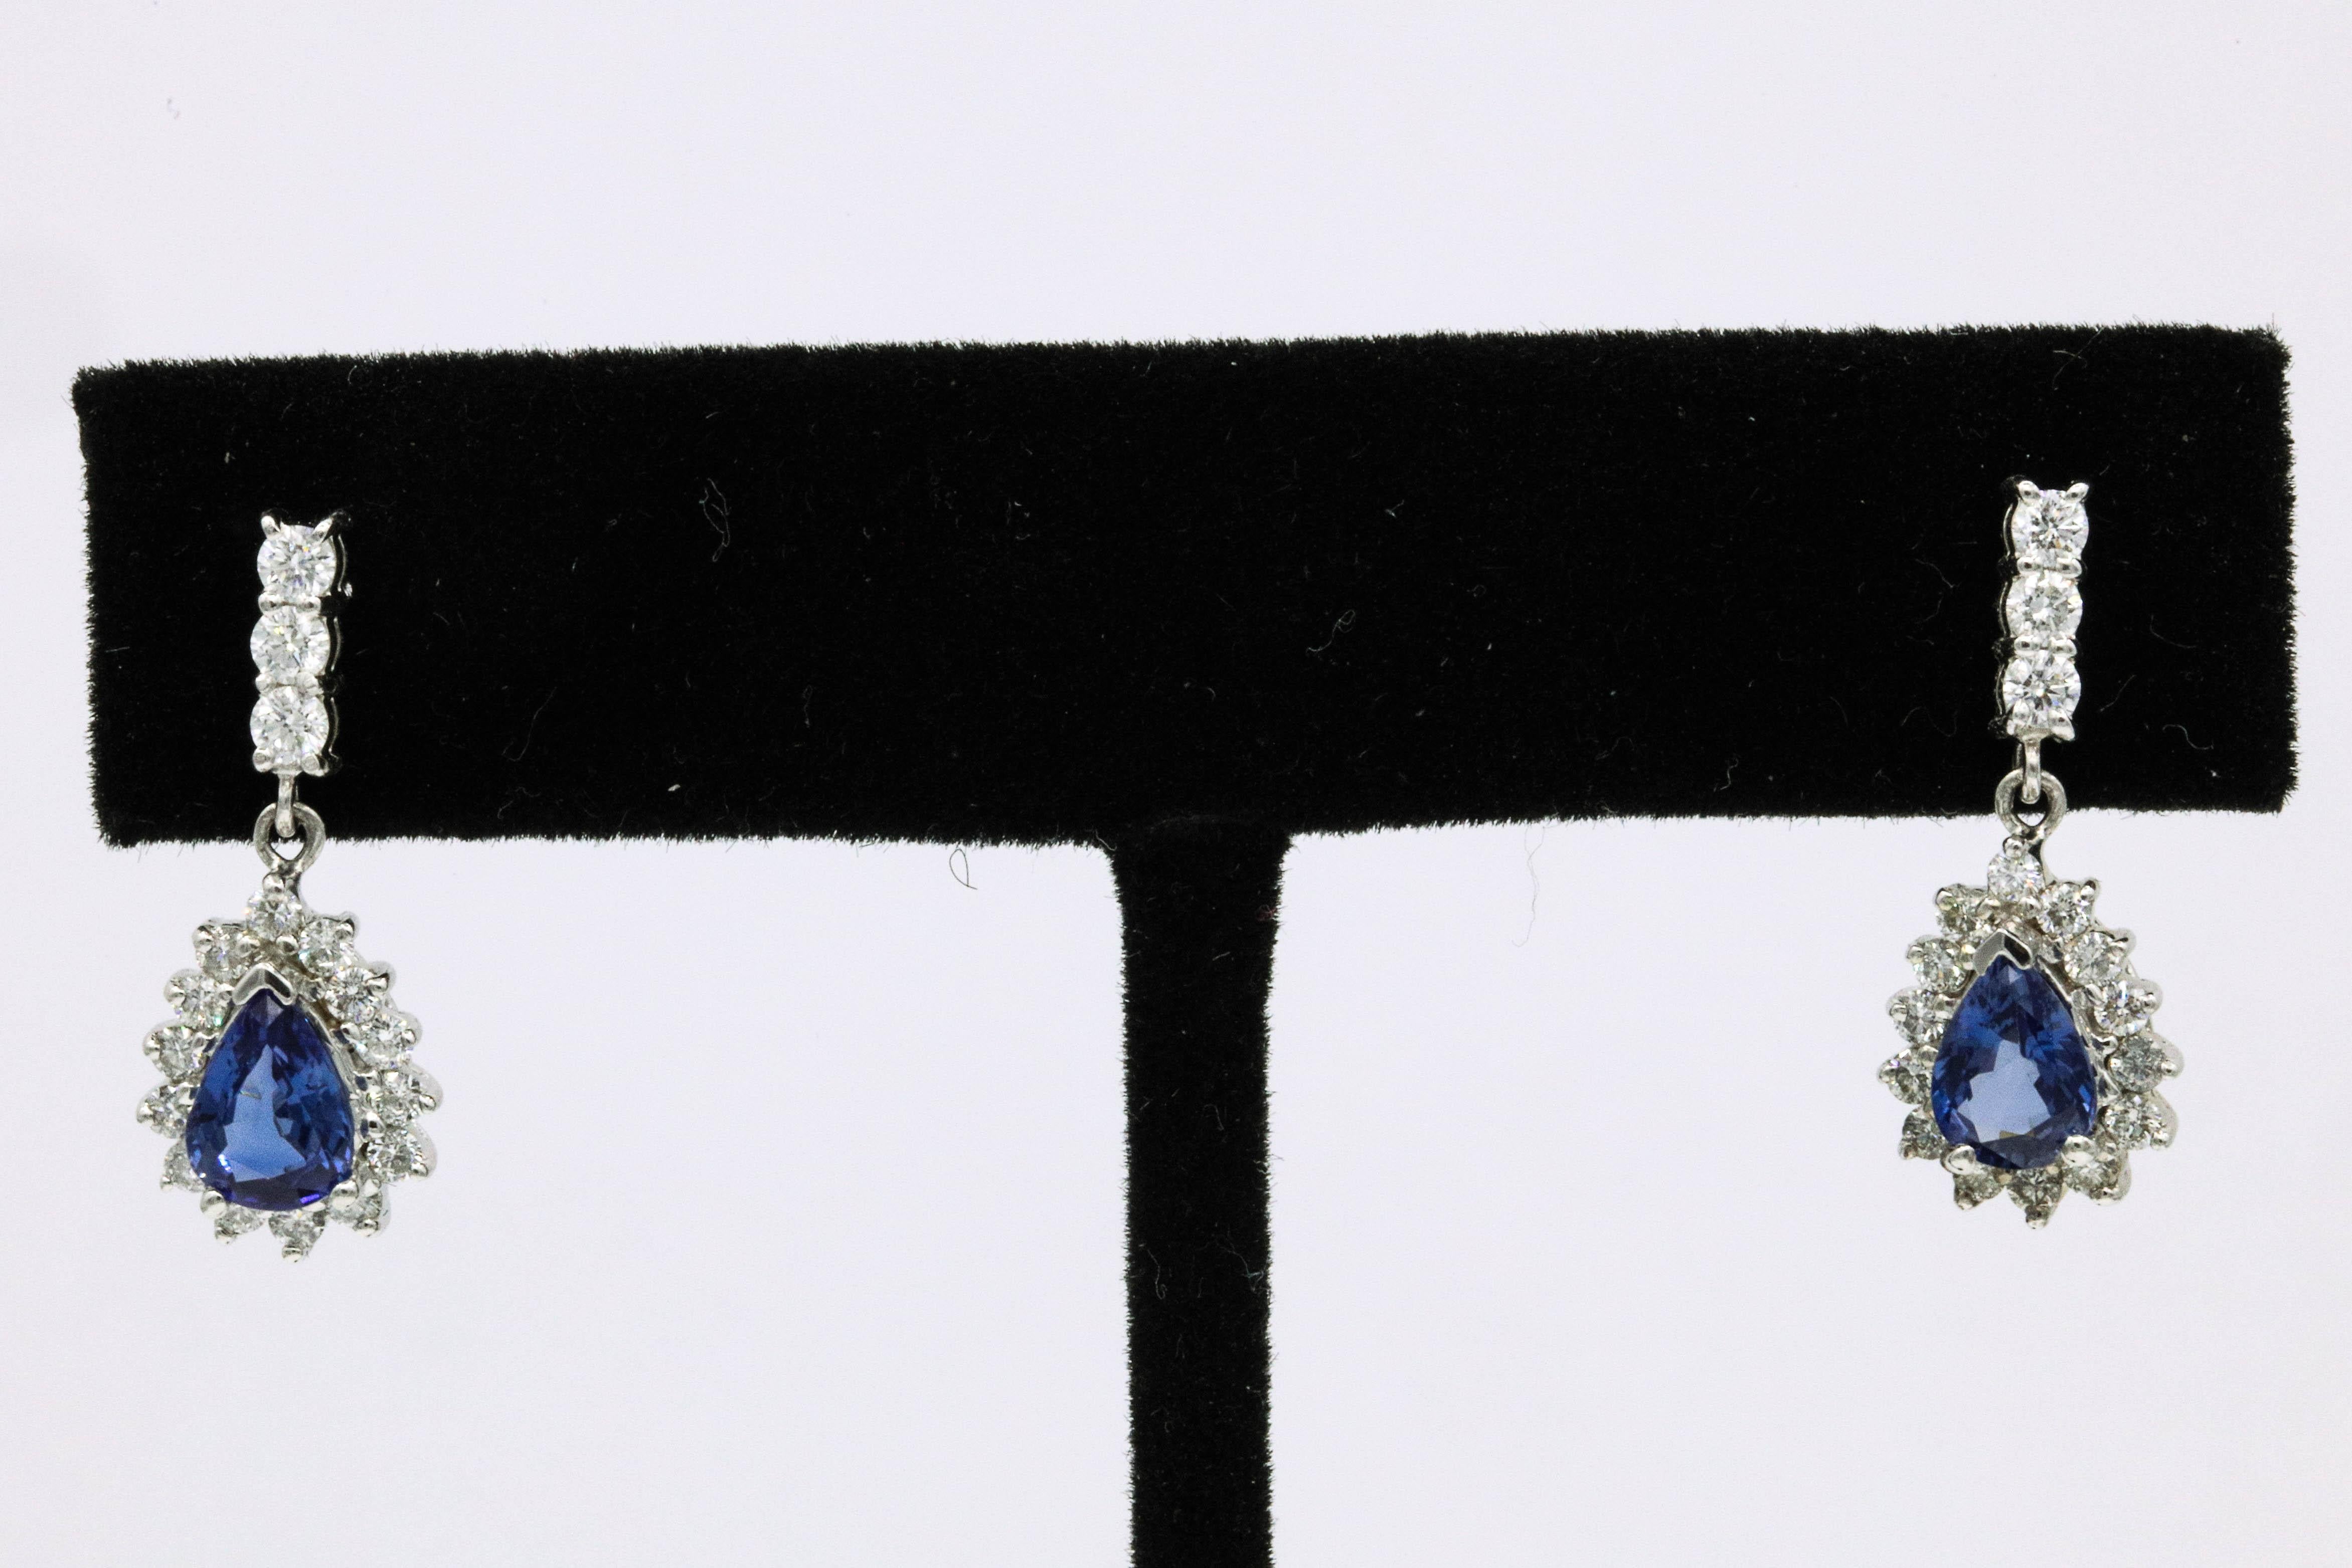 18K White gold drop earrings featuring two pear shape Nigerian Sapphires, 1.56 carats, flanked with round brilliants weighing 0.77 carats.